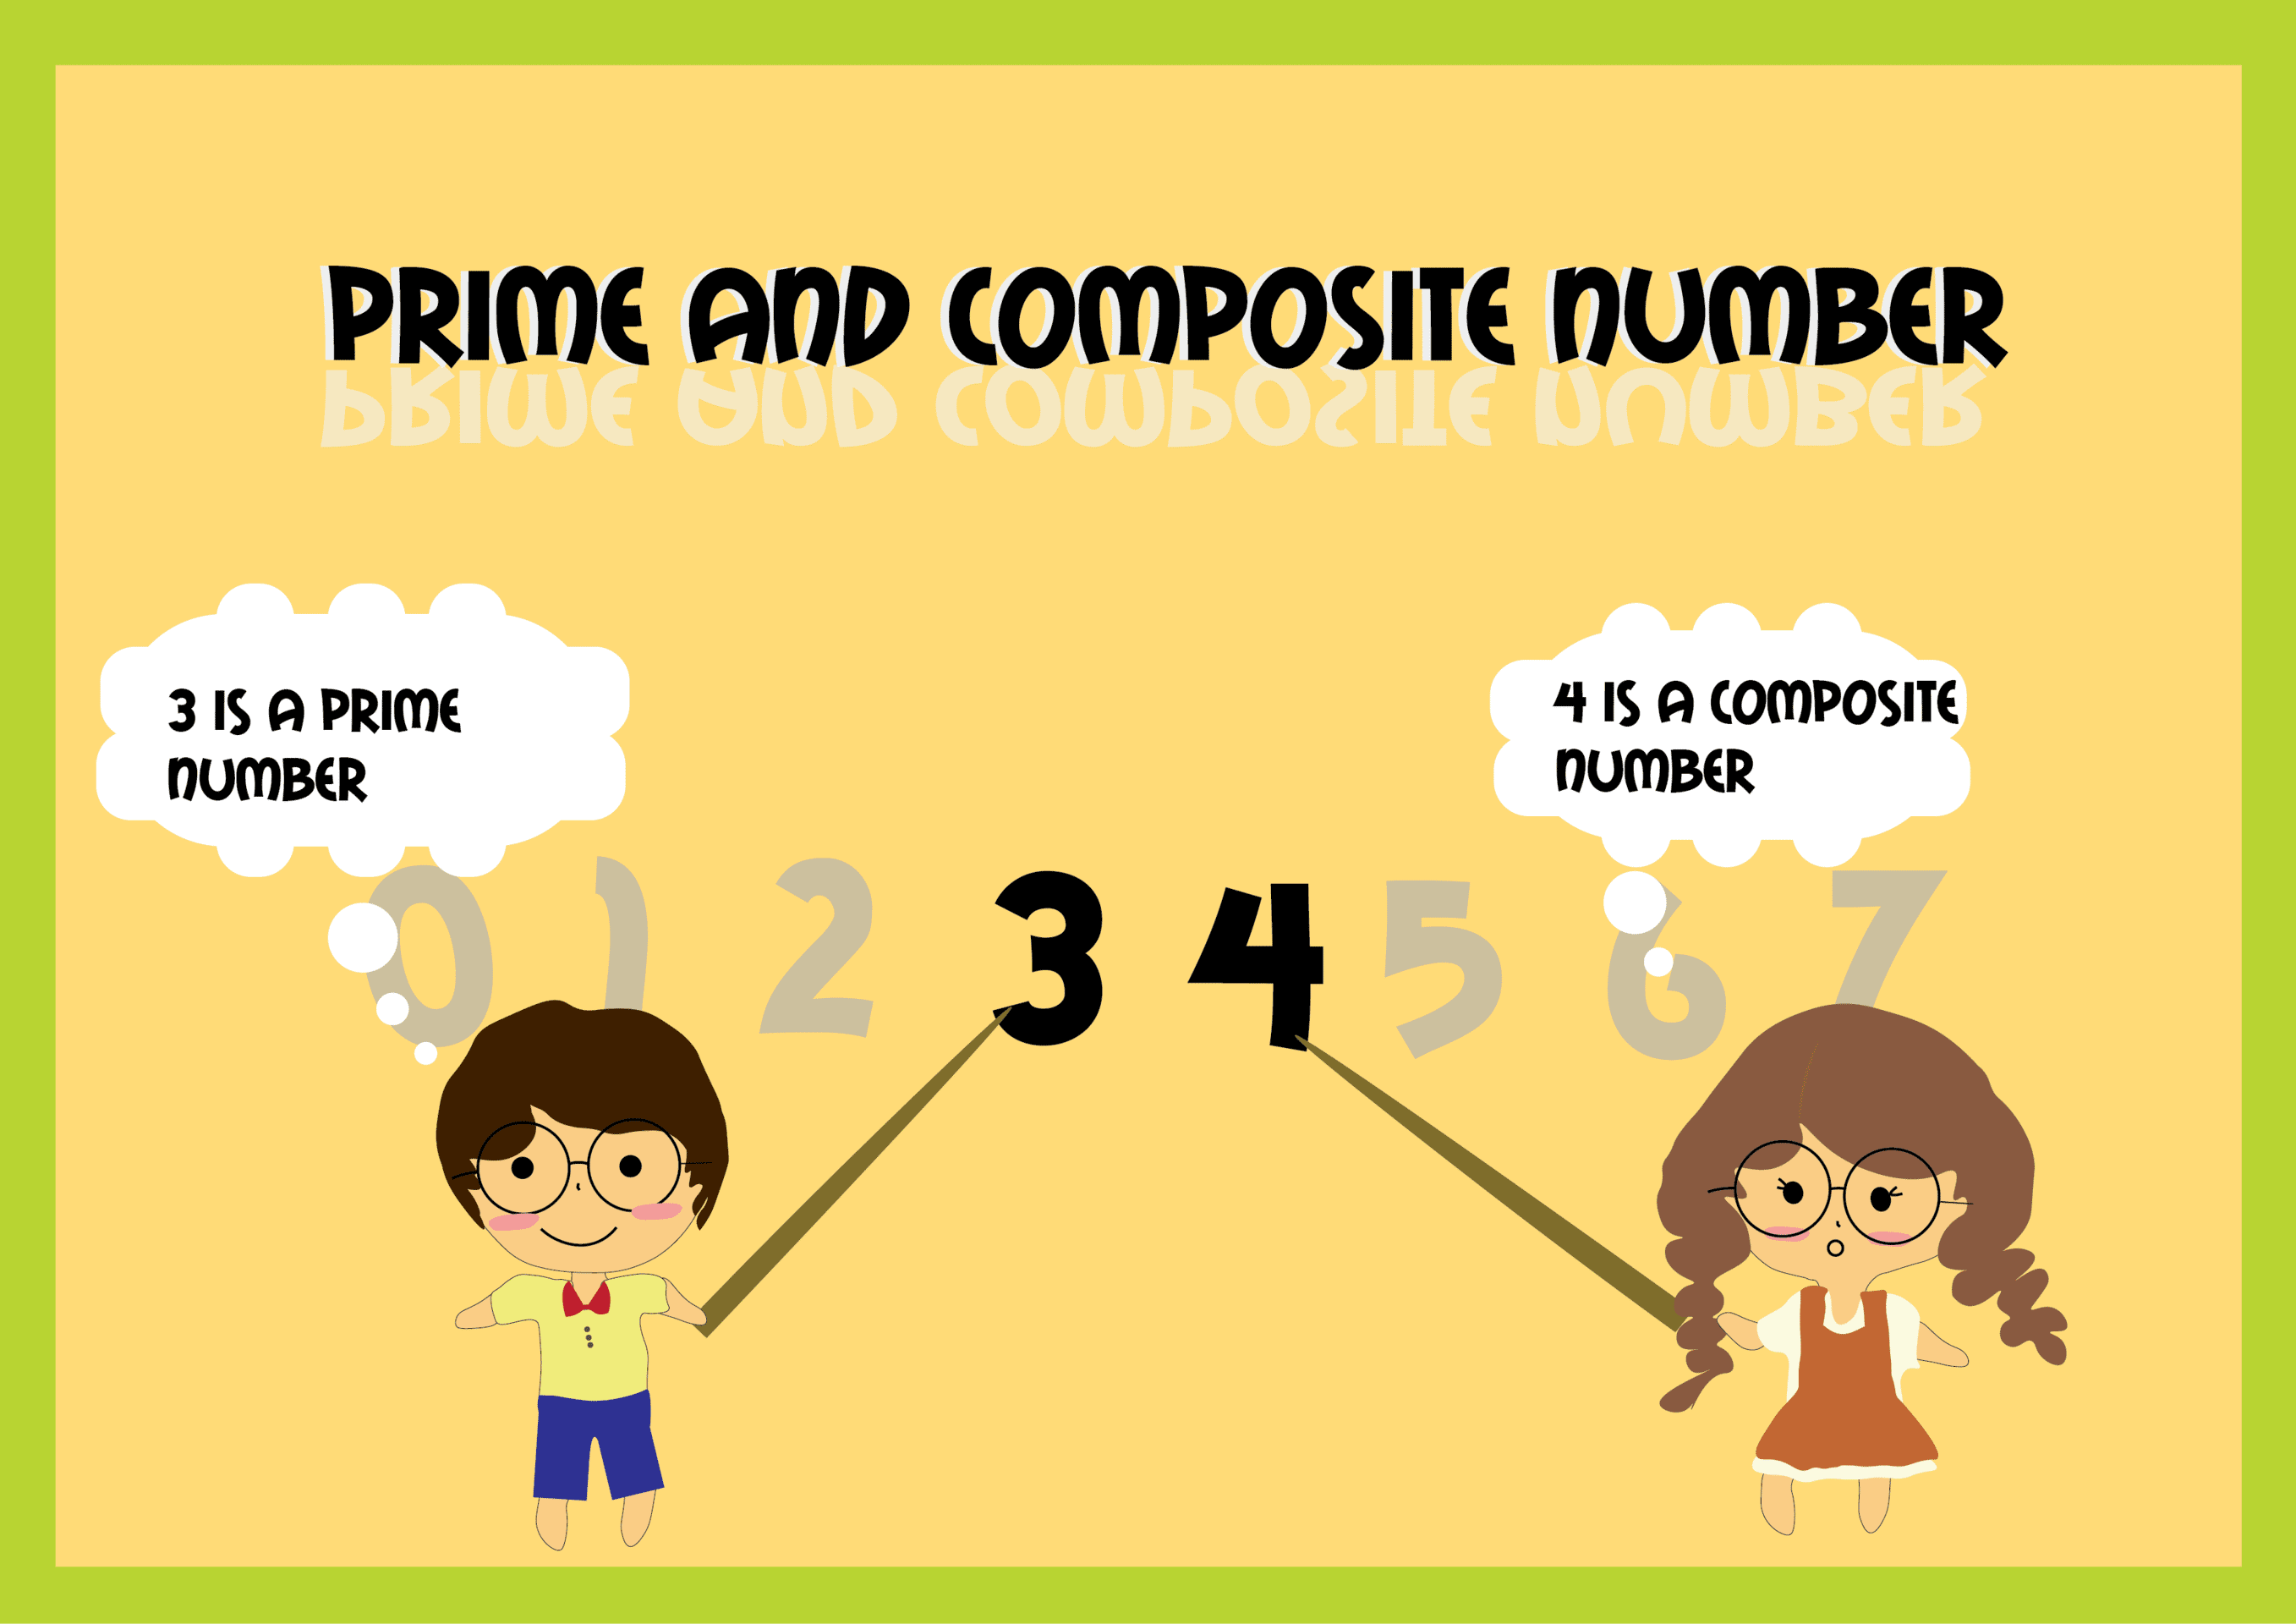 indicating prime and composite numbers in prime and composite number game